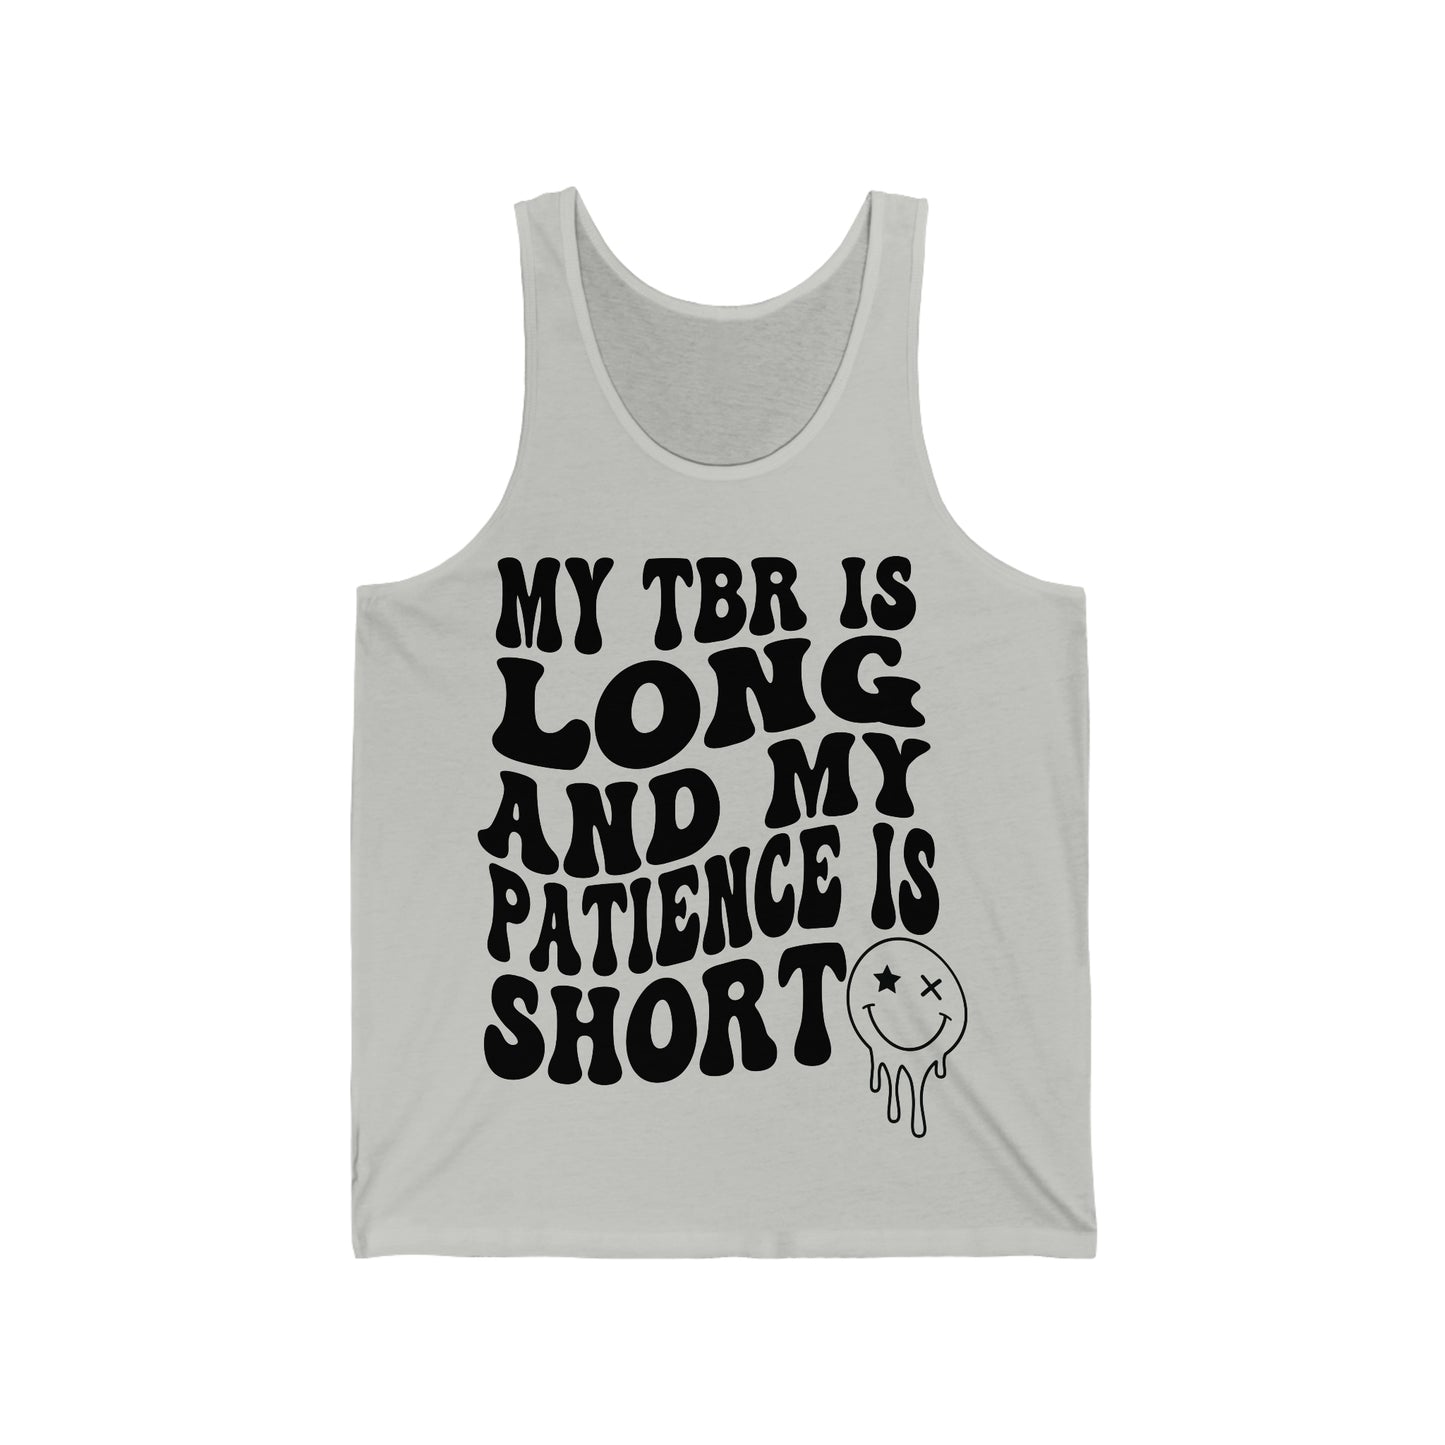 "My TBR is Long and my Patience is Short" Smiley Face Jersey Tank